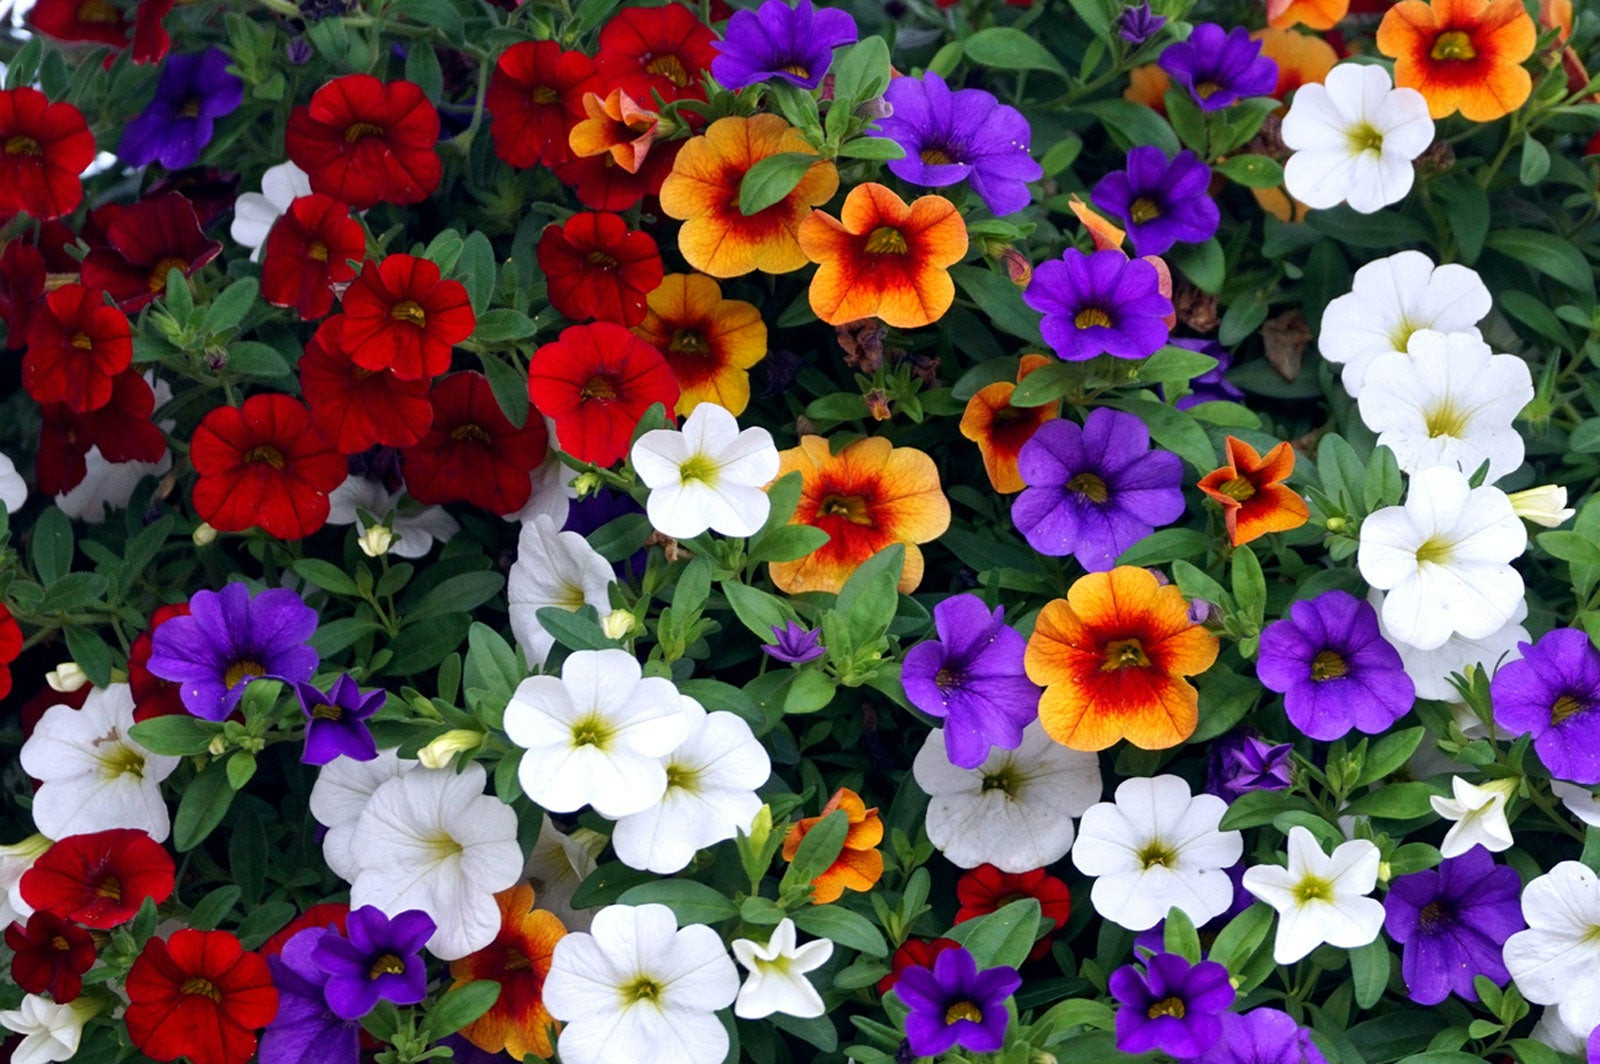 Calibrachoa Care – How To Grow And Care For Million Bells Flower